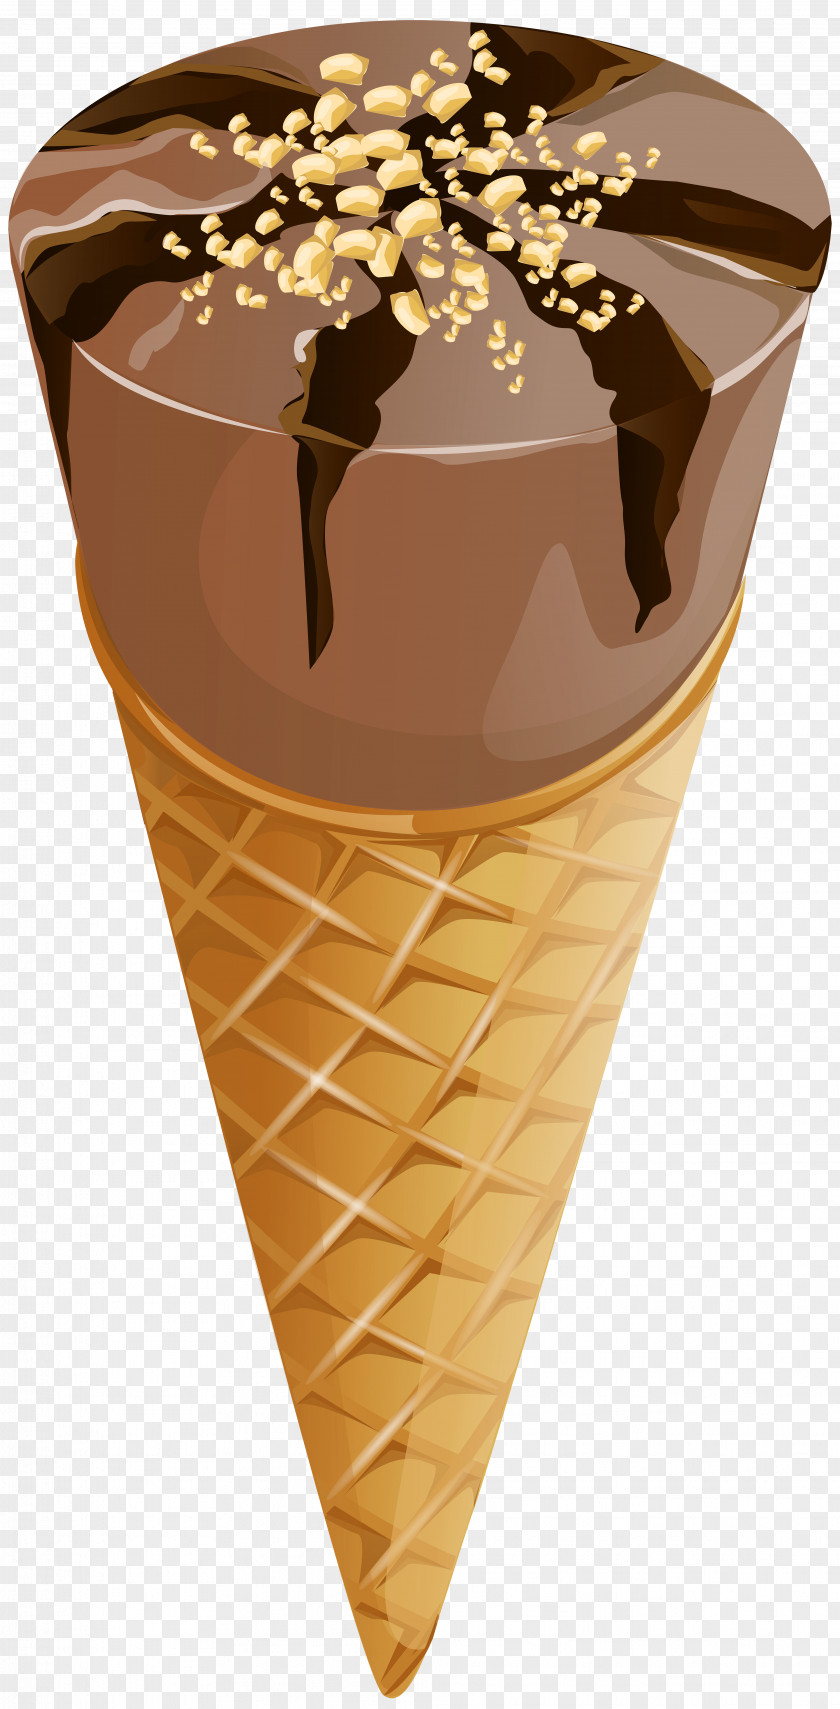 Chocolate Ice Cream Transparent Clip Art Image File Formats Lossless Compression PNG